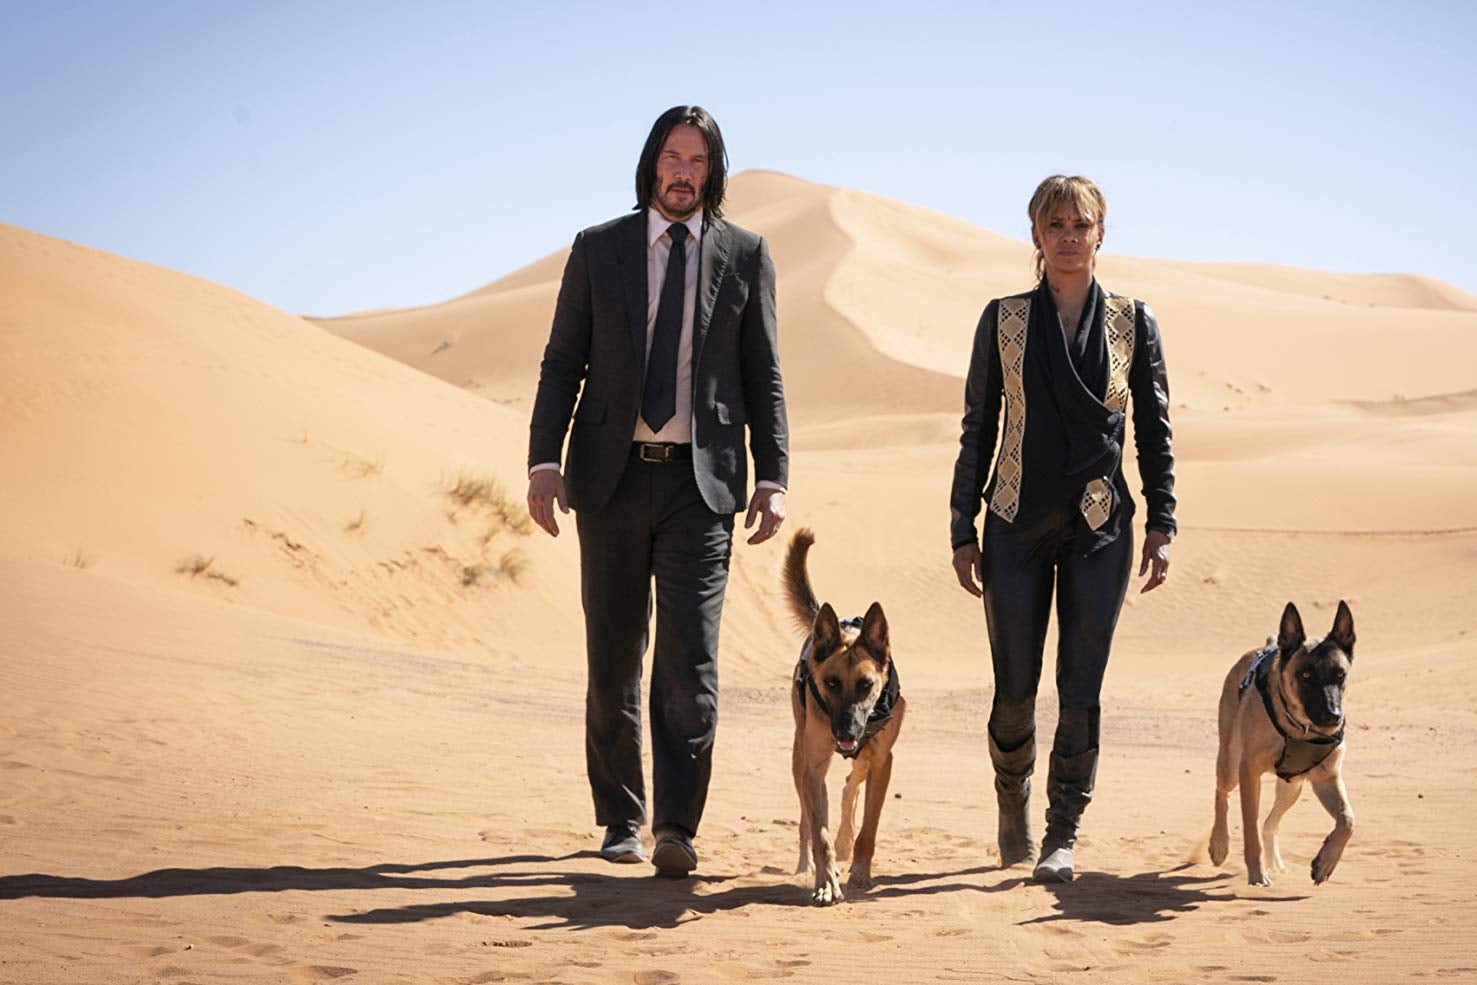 Keanu Reeves, Halle Berry, and two dogs striding across a desert.